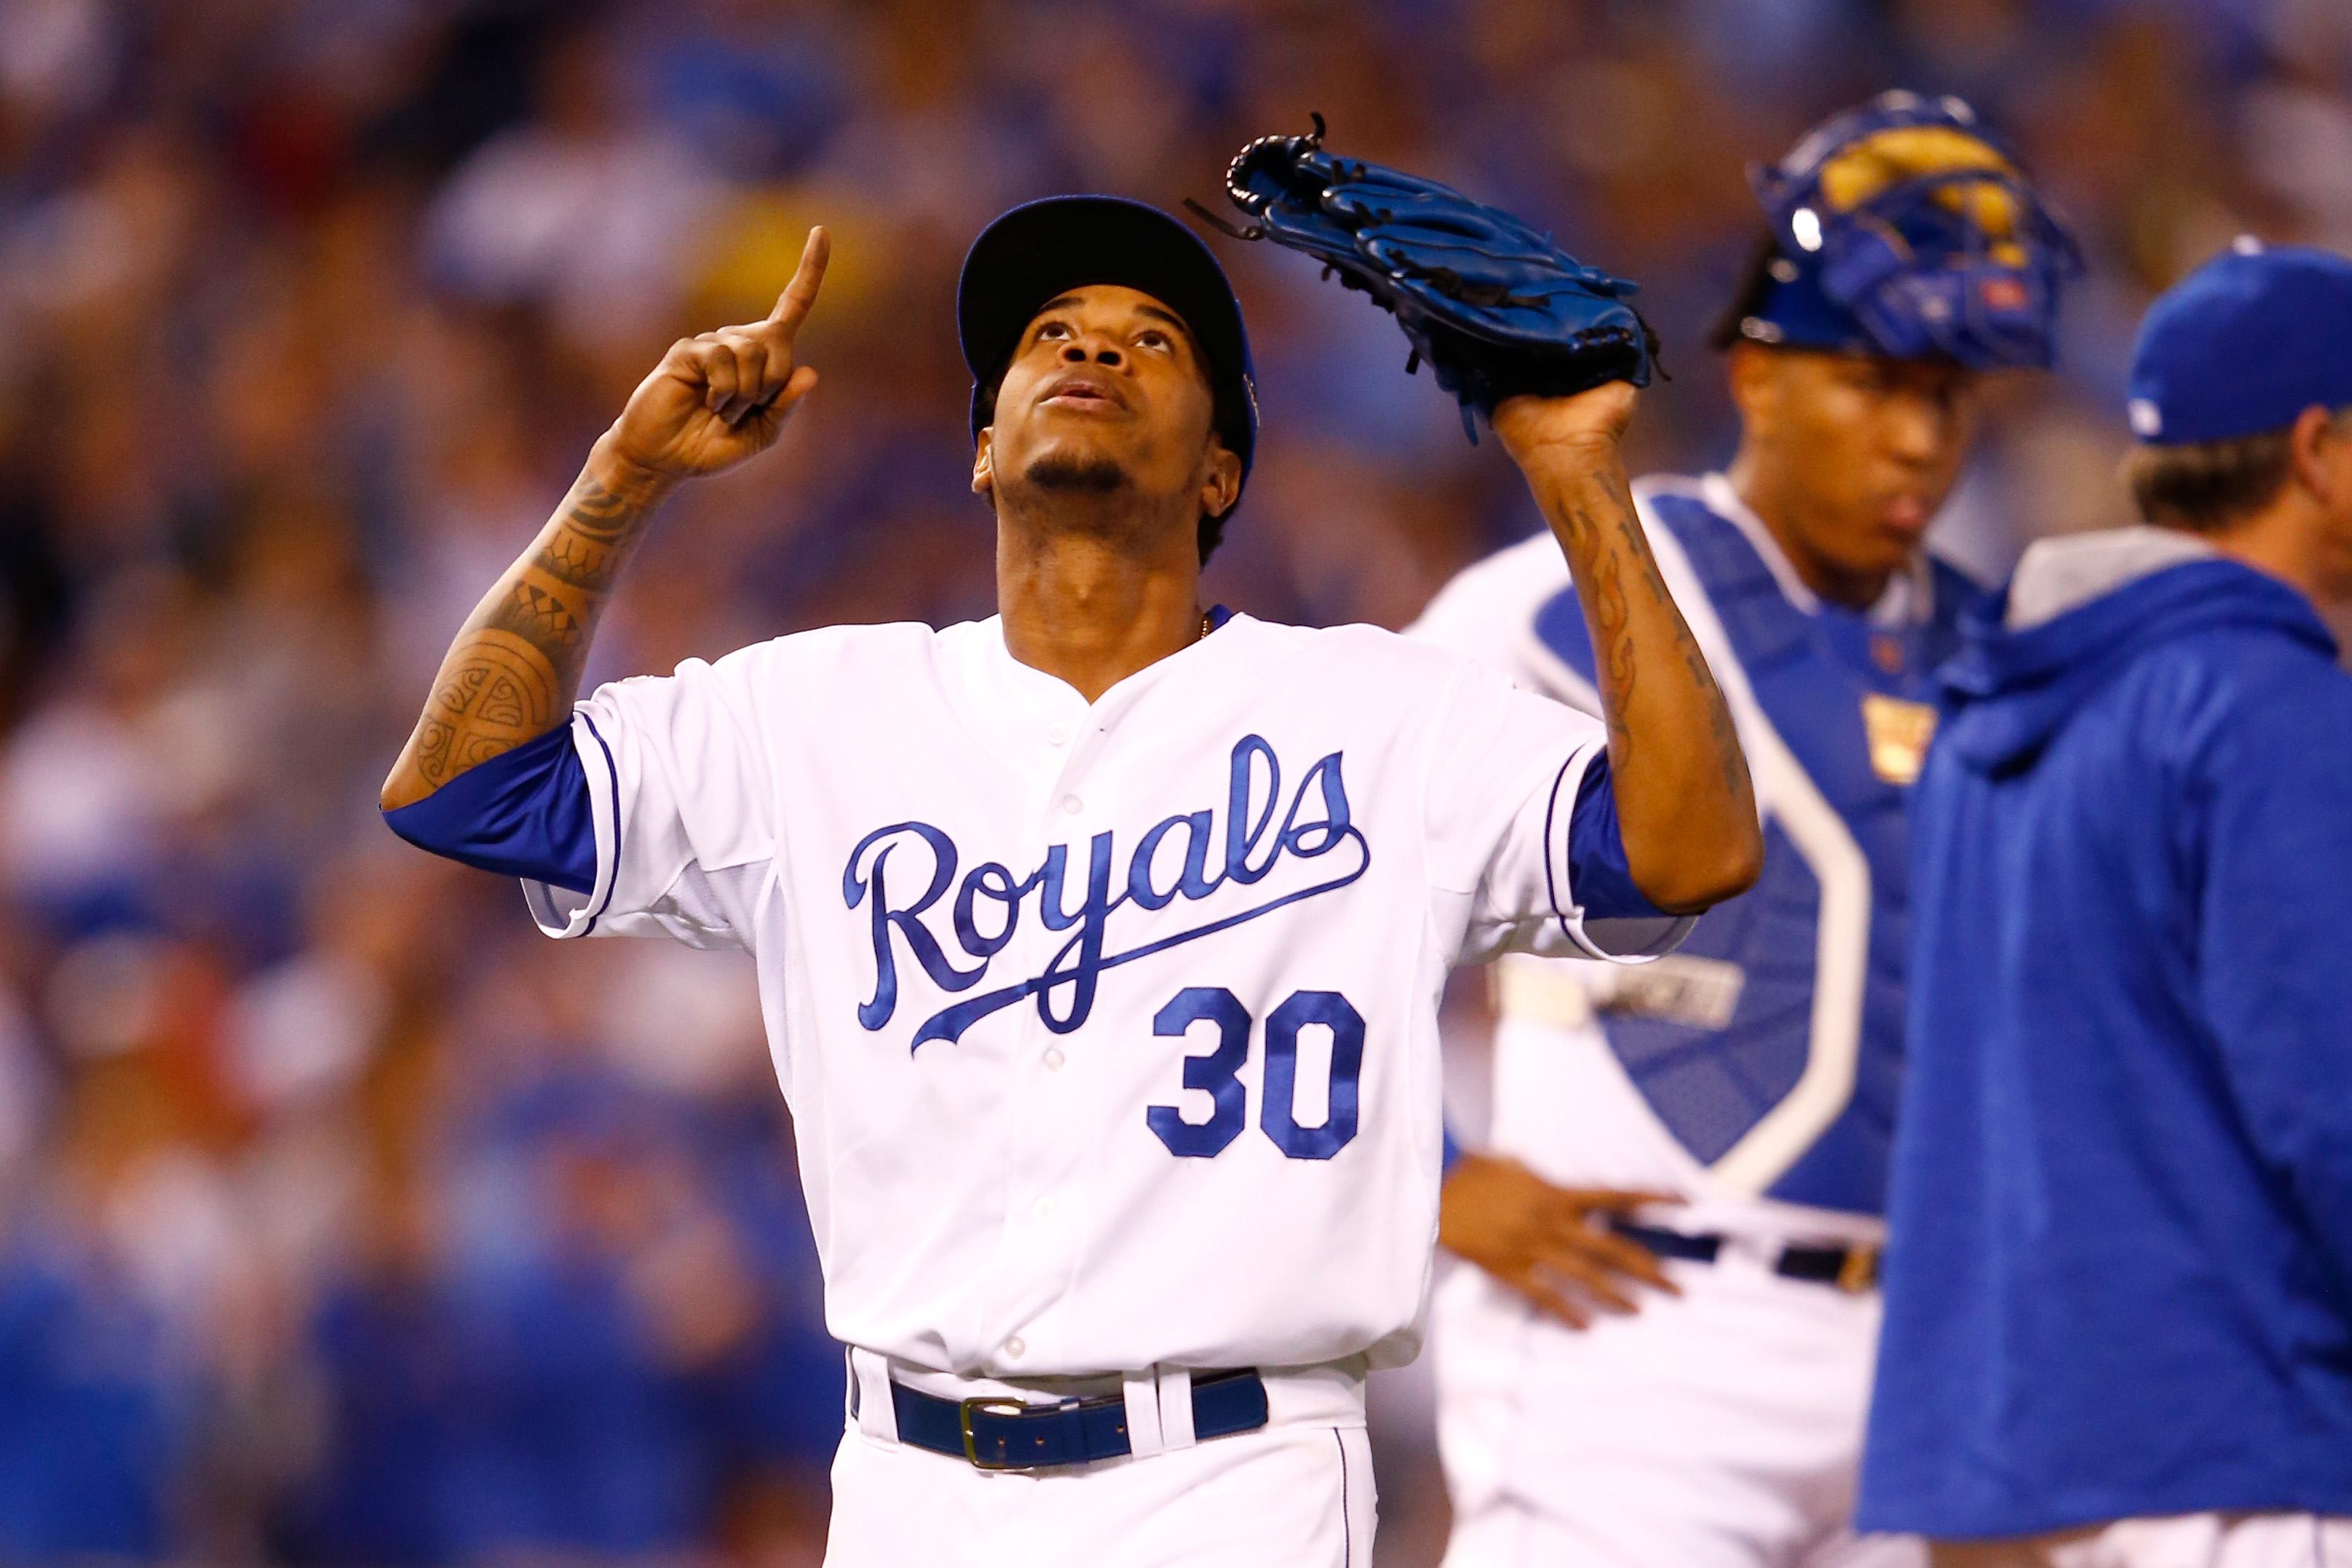 Royals' Yordano Ventura breaks own record for fastest pitch by a